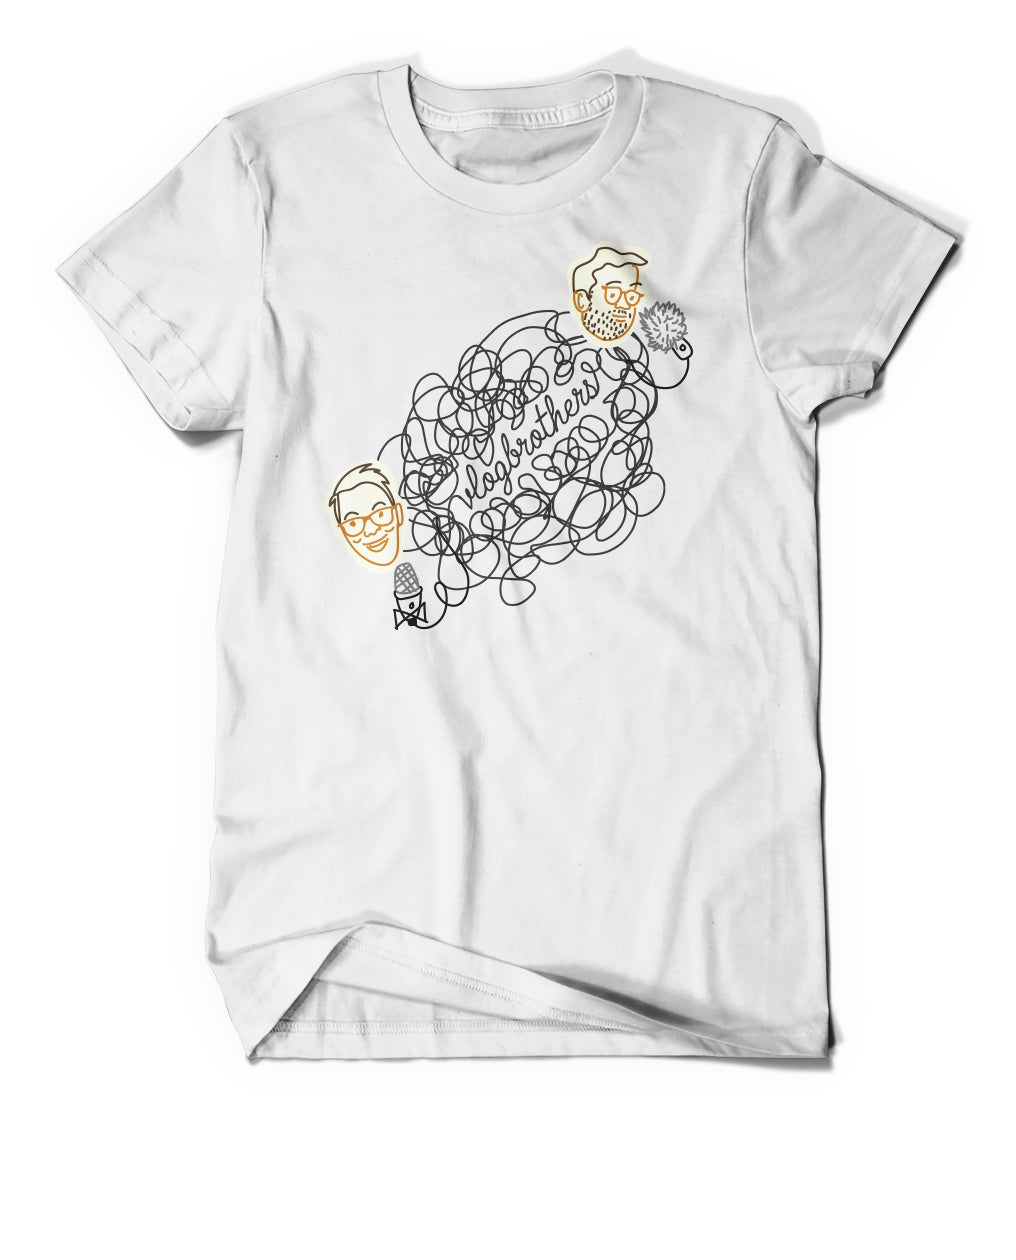 White shirt. Image is of Hank and John with illustrations of their microphones for podcasting. In between them is the word, "Vlogrbothers" written in cursive but made to be the scribbly lines of a microphone cord. 